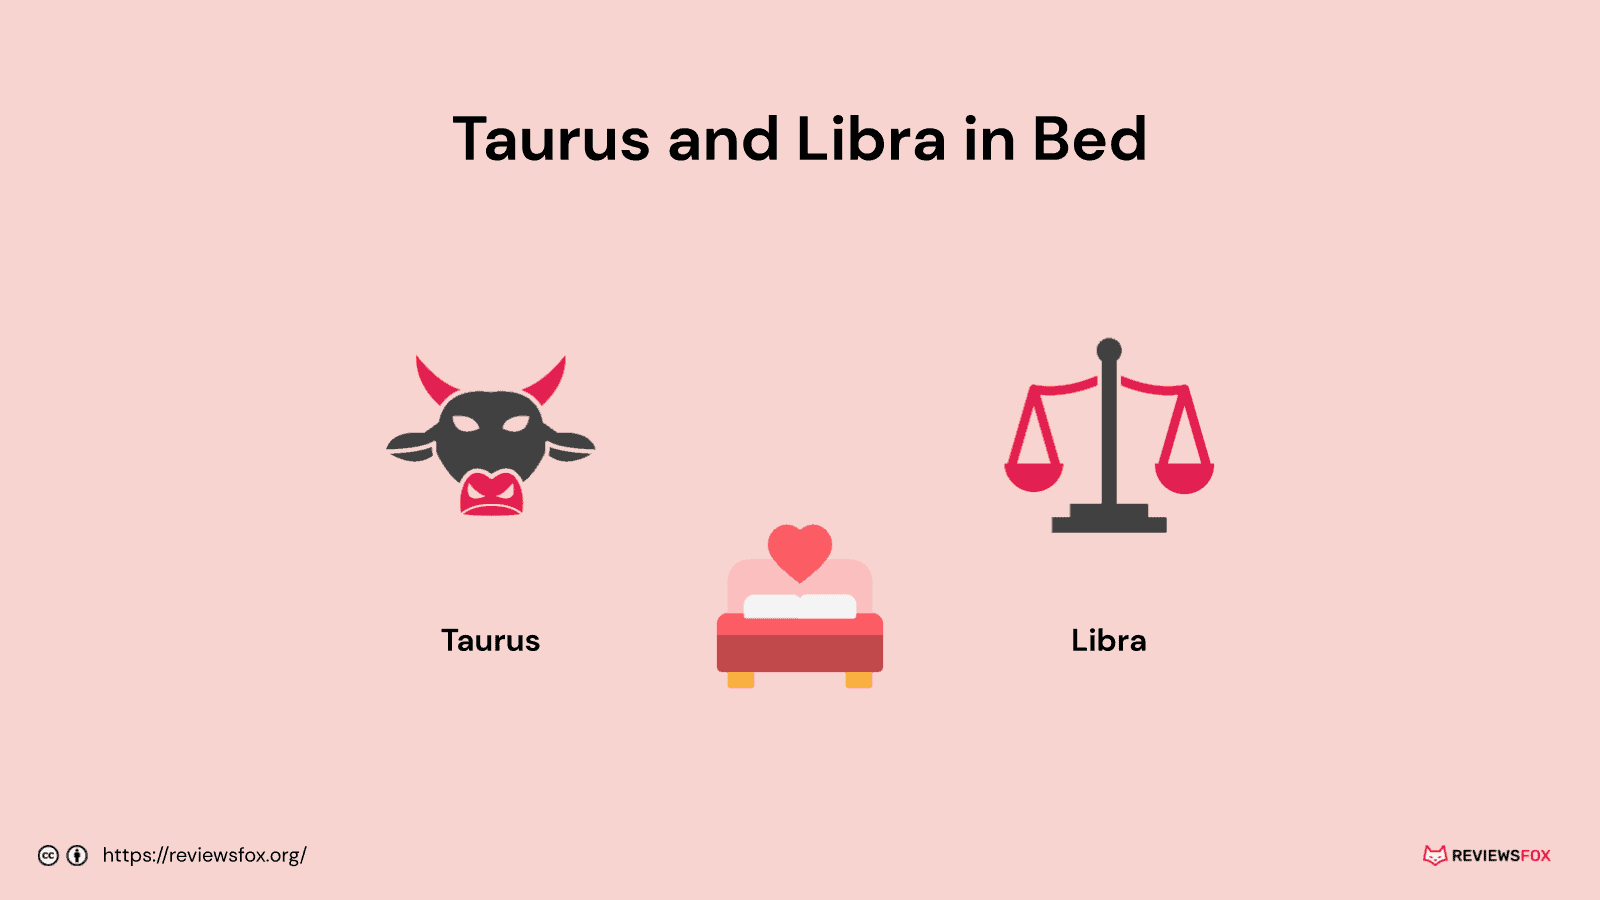 Taurus and Libra in bed